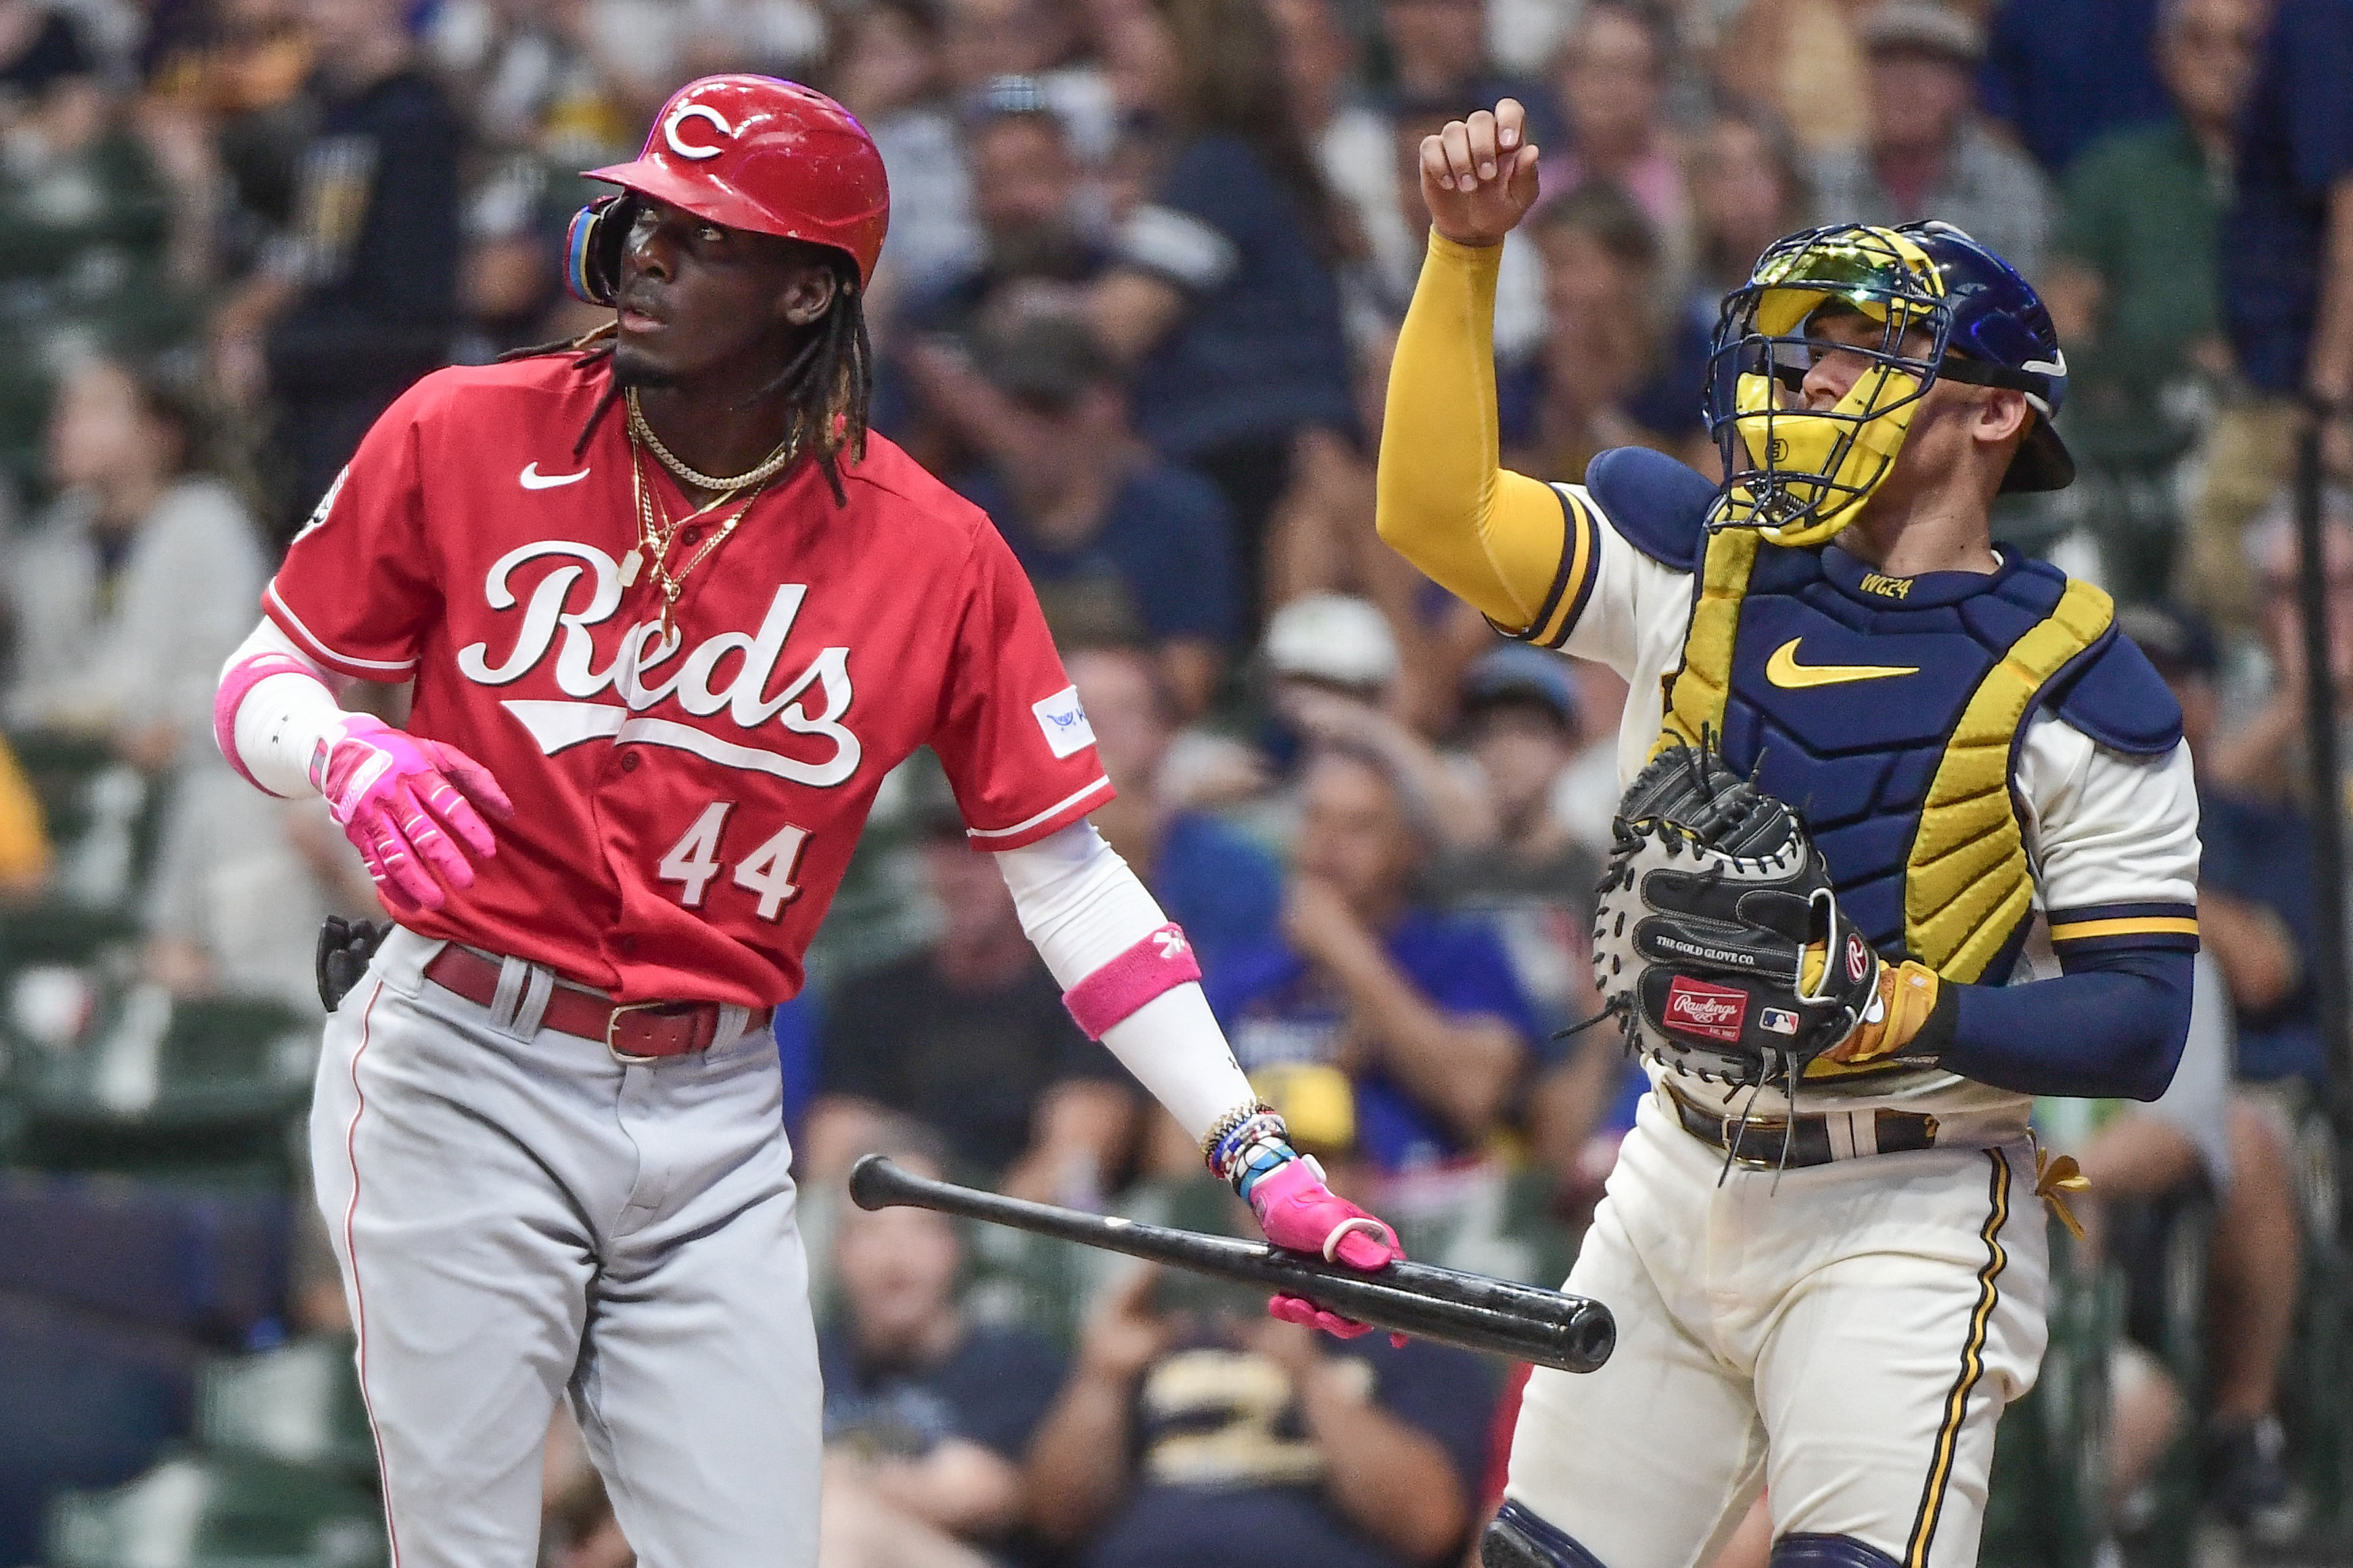 Pitcher Freddy Peralta Unique Role With Brewers This Season